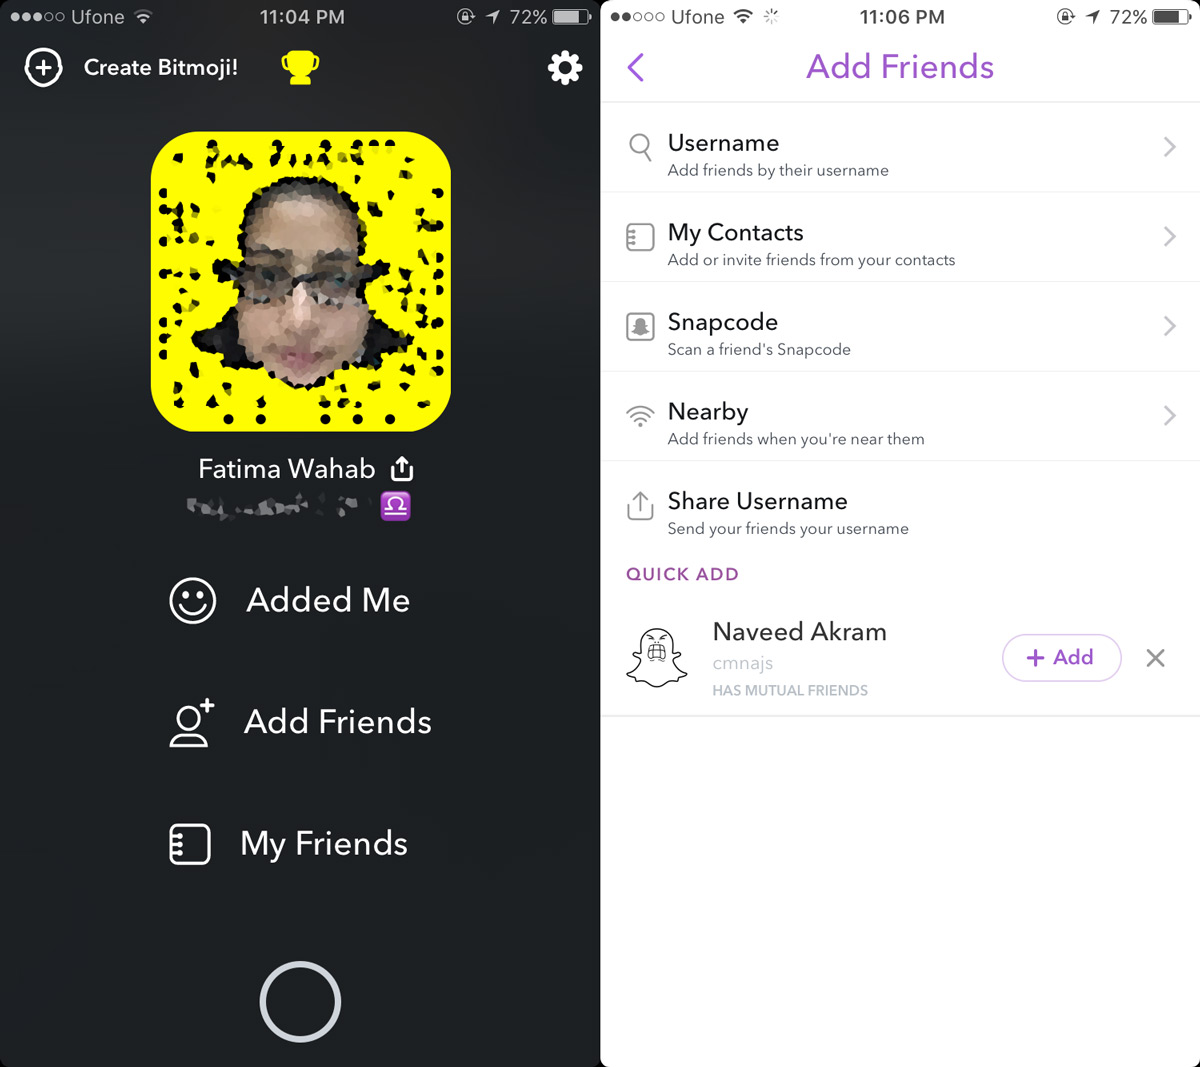 How to Add Someone on Snapchat quickly? 6 Ways